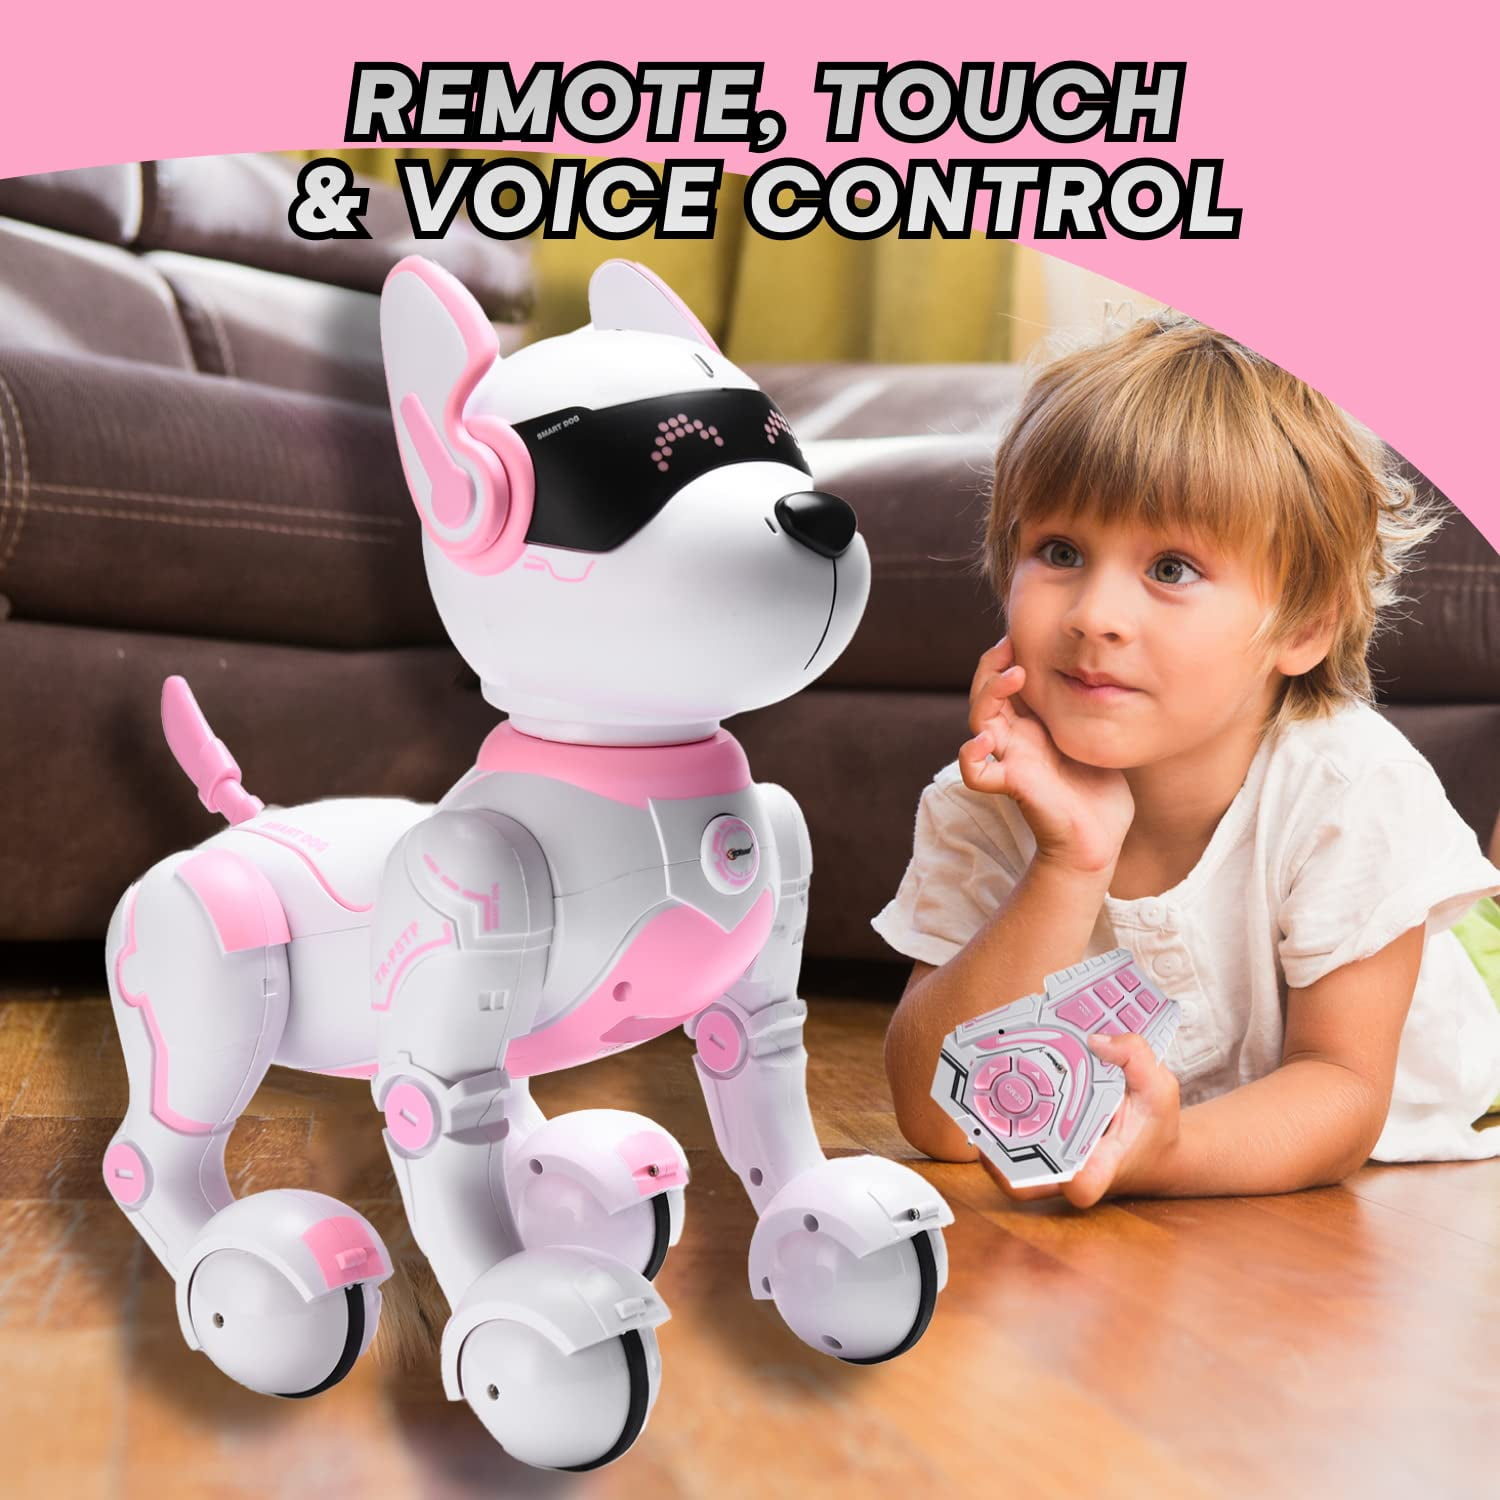 10 Best Robot Dog Toys for Kids in 2022 Reviews - ElectronicsHub